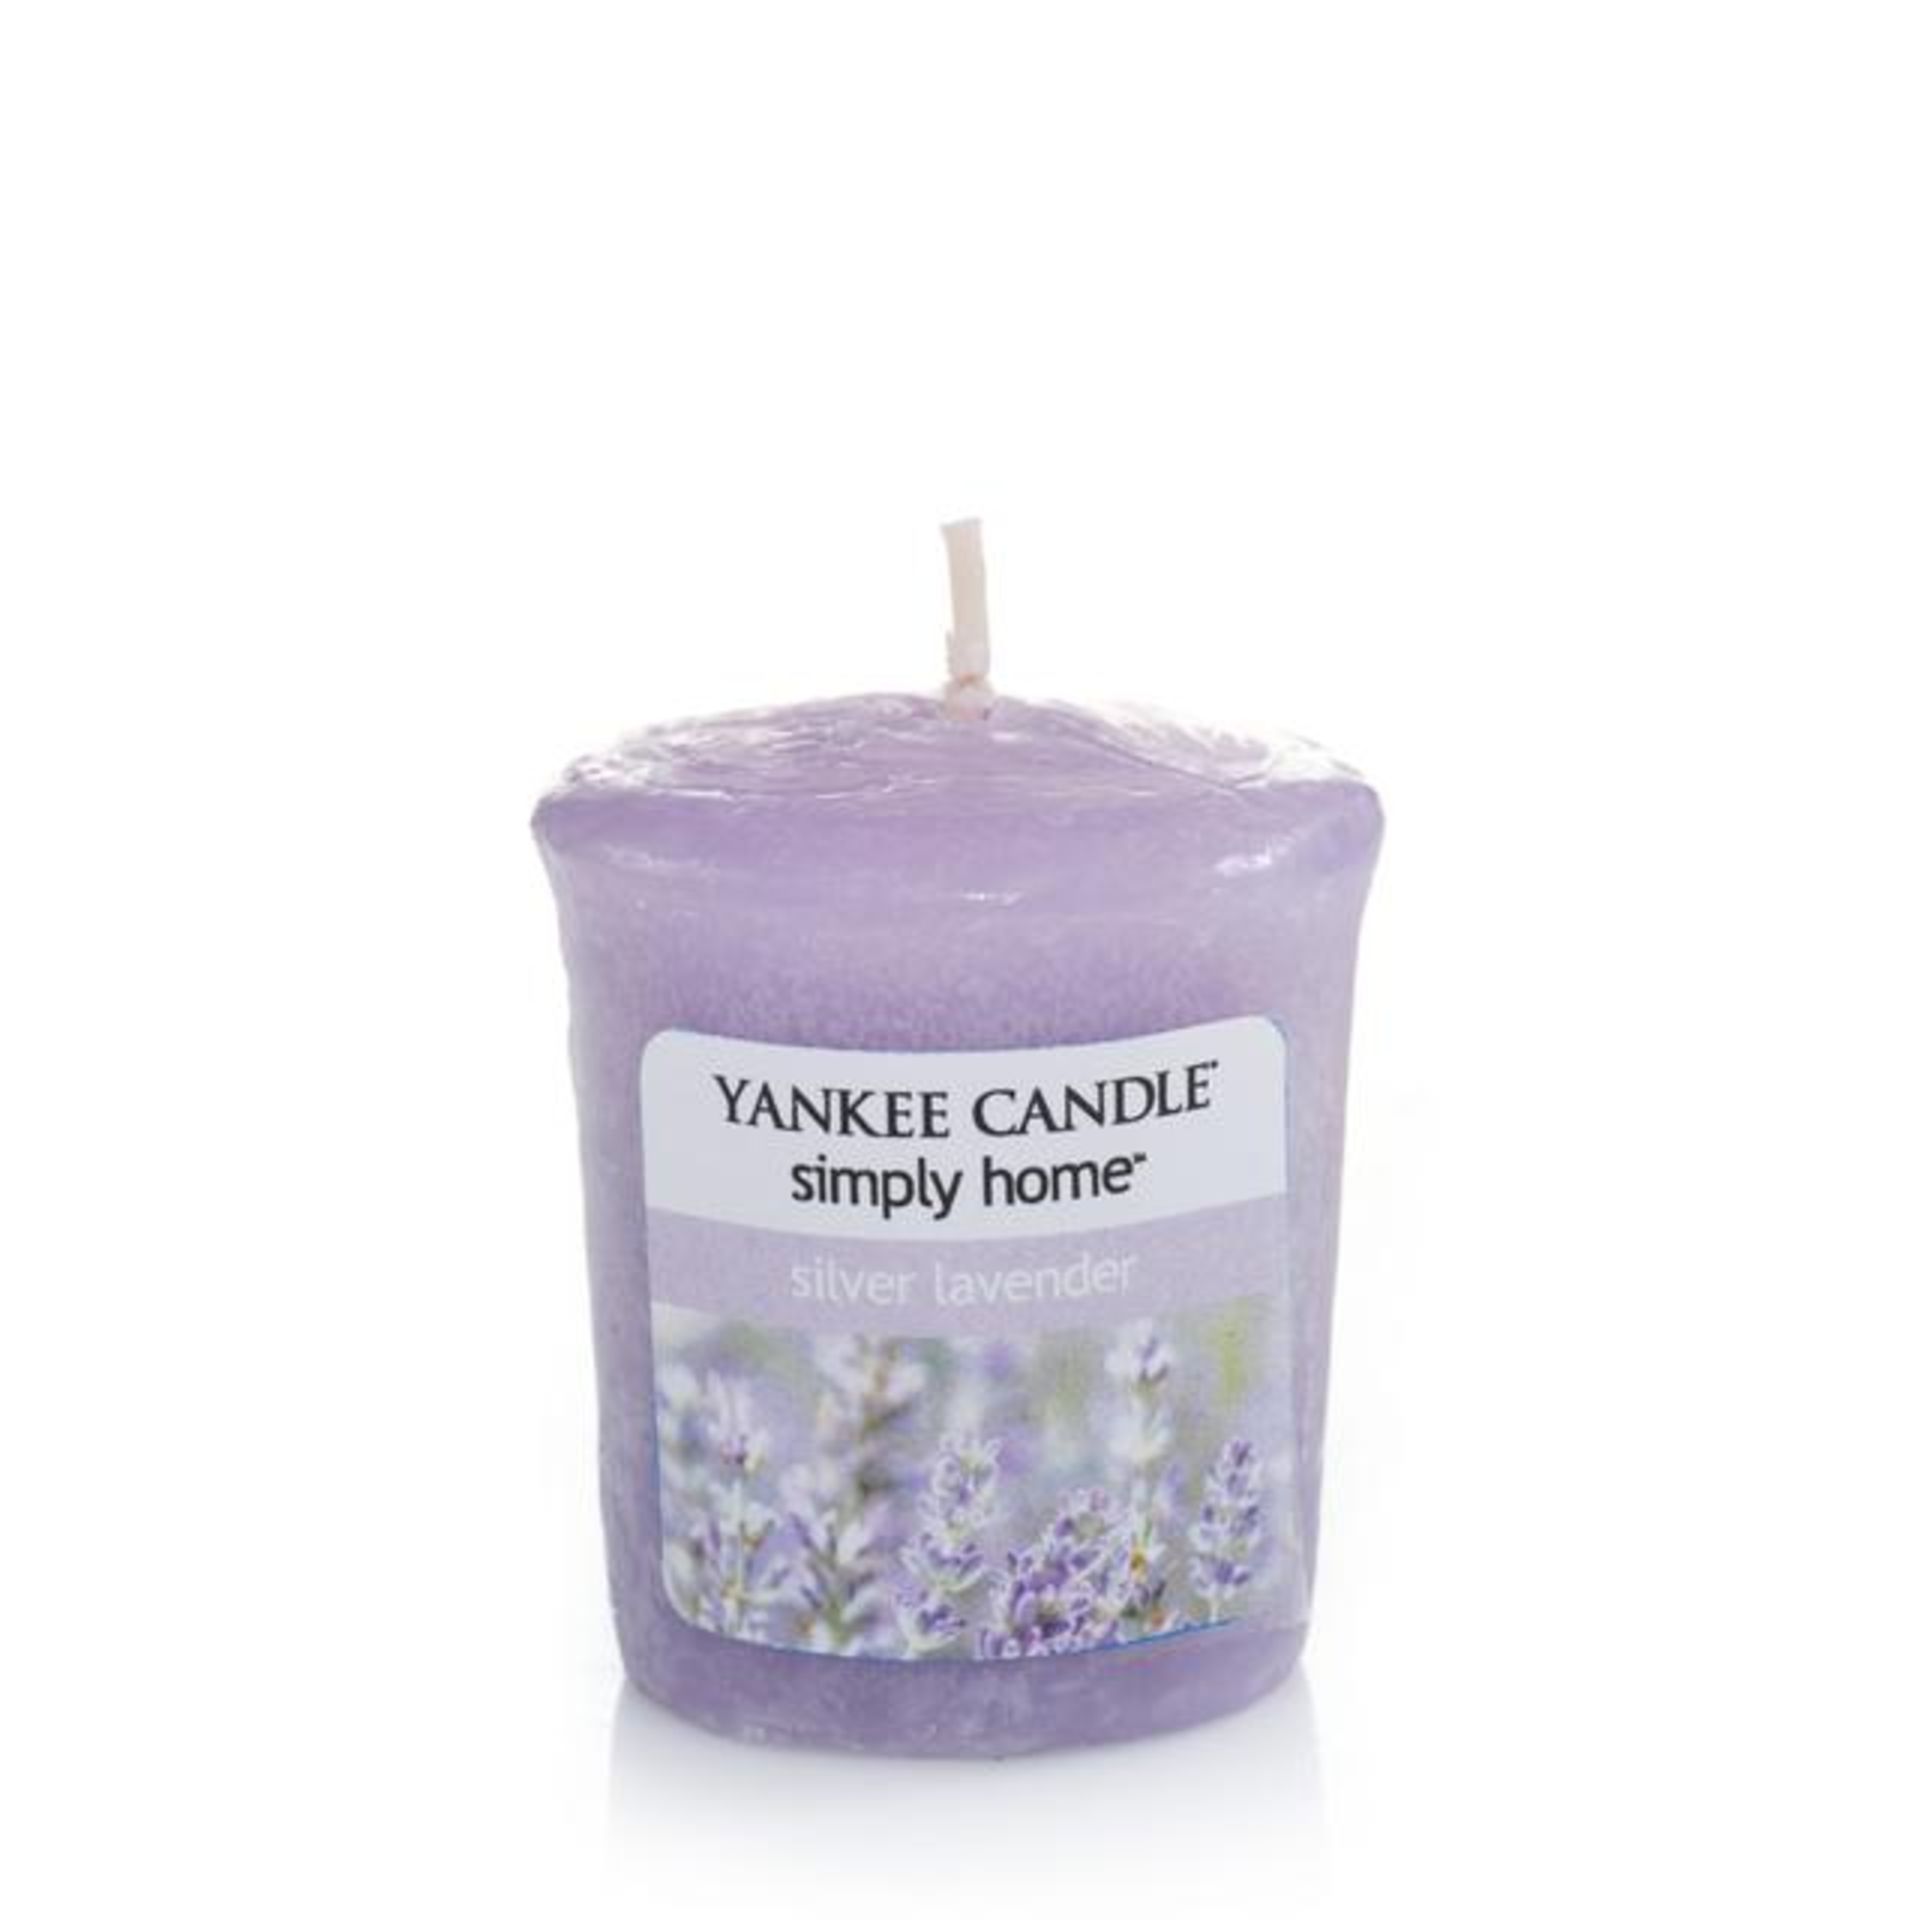 V *TRADE QTY* Brand New 18 x Yankee Candle Votive Silver Lavender 49g Total Amazon Price £71.82 X - Image 2 of 2